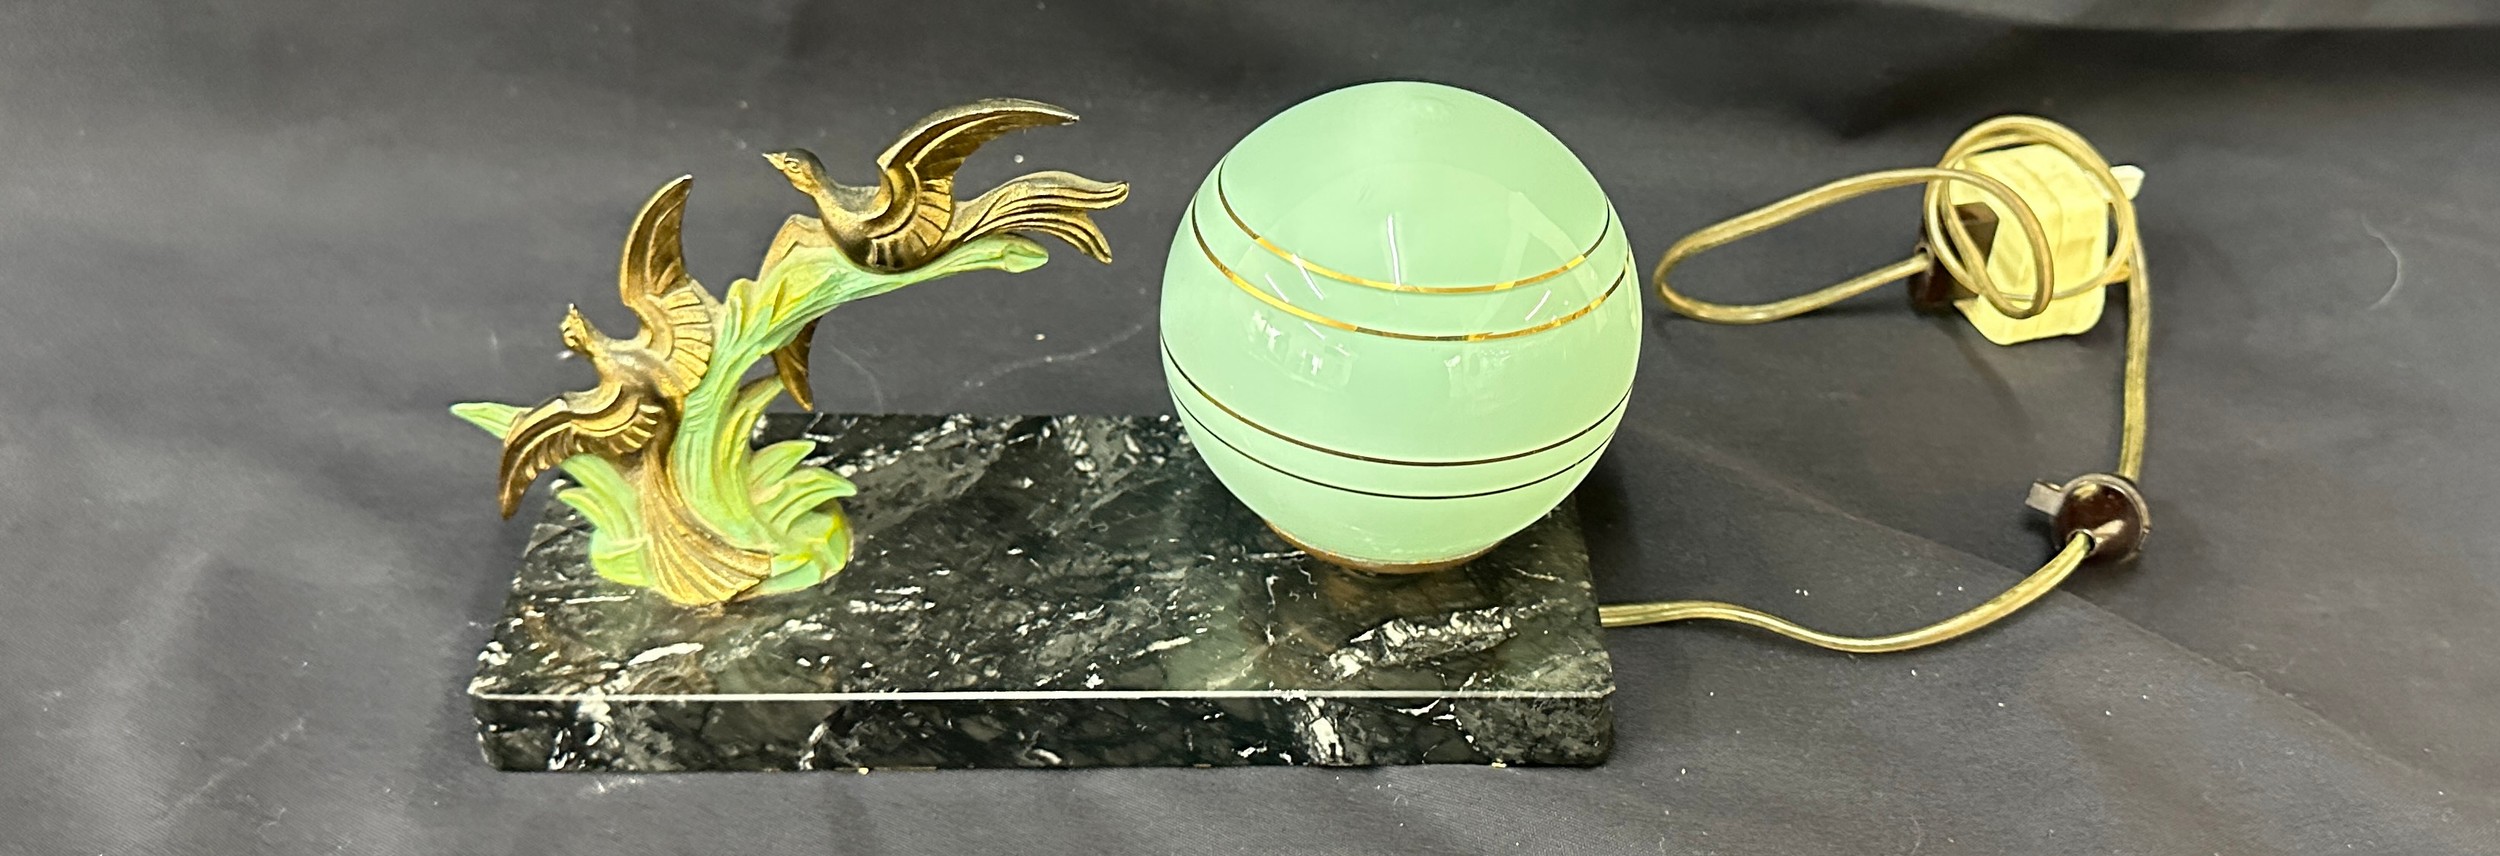 Art deco 1930's lamp measures approx L9" X W 4" and H 6" - Image 4 of 4